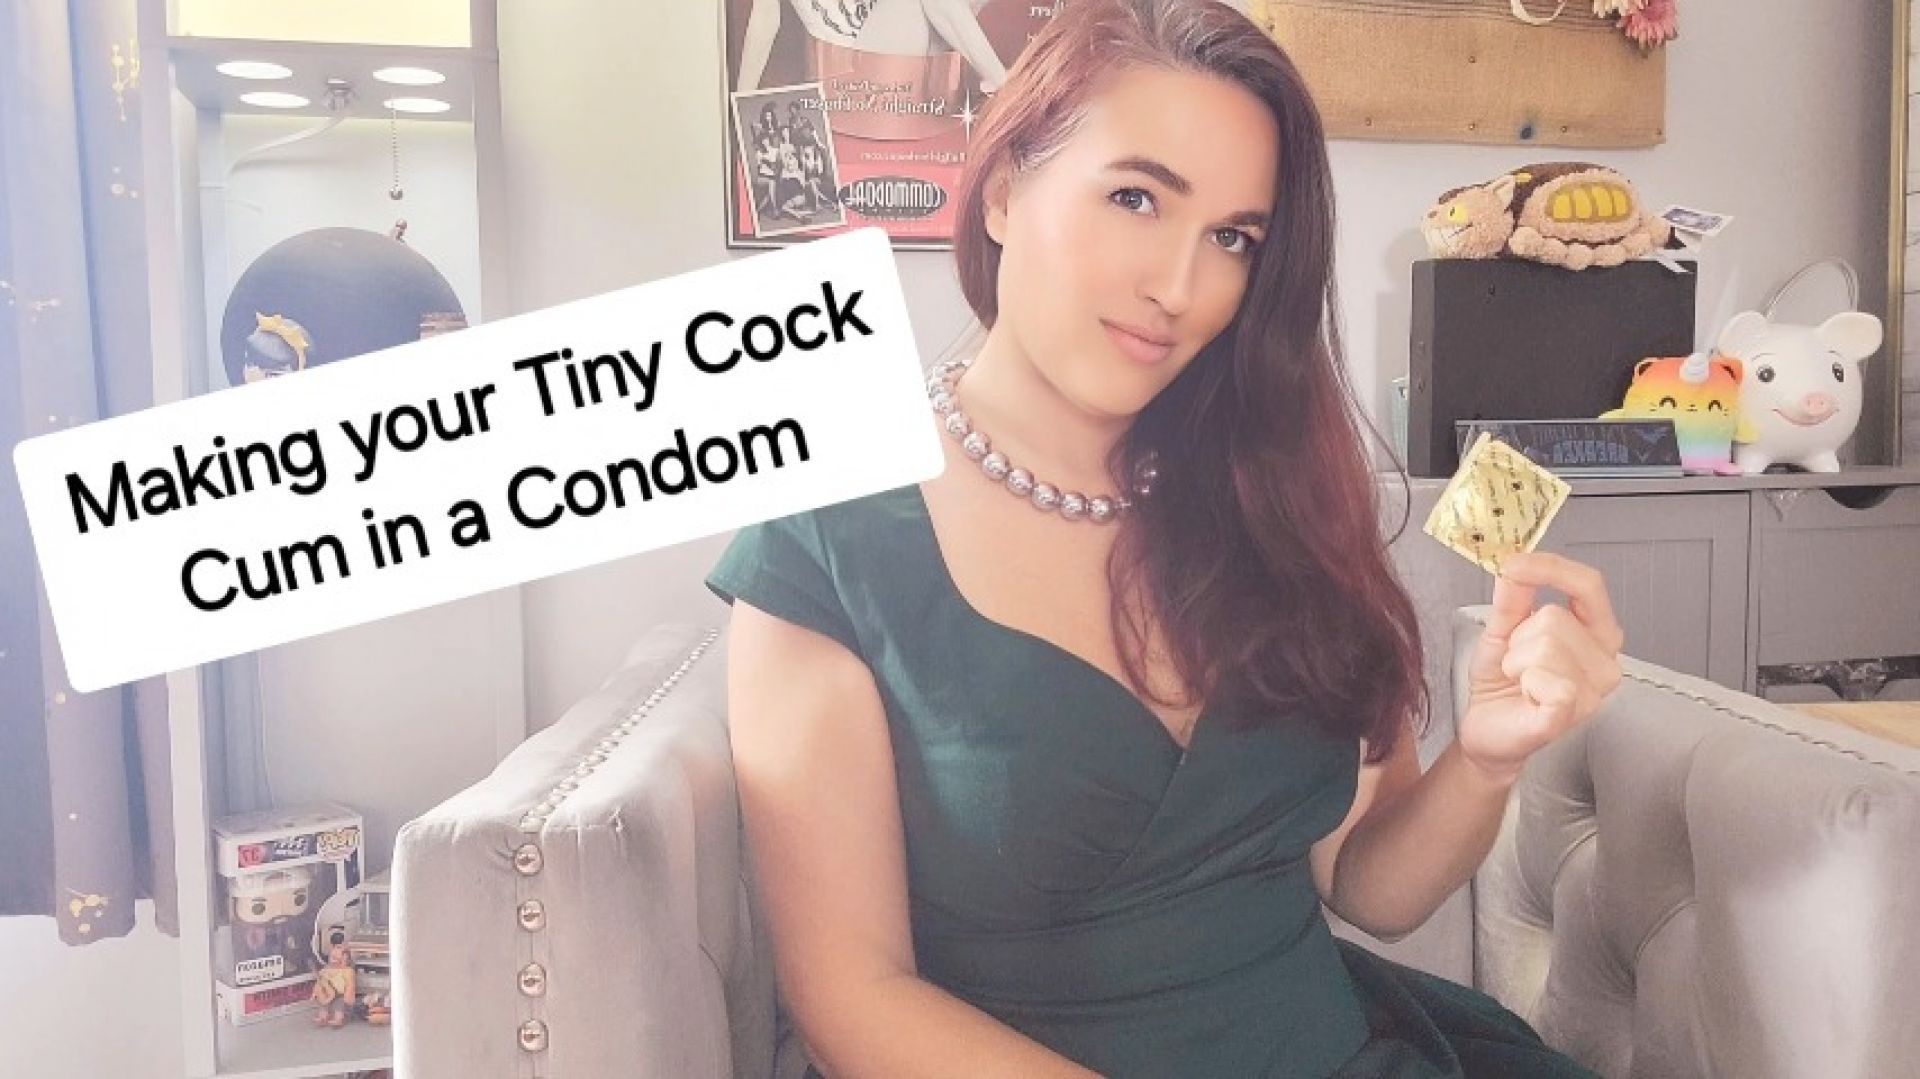 Making your tiny cock cum in a condom